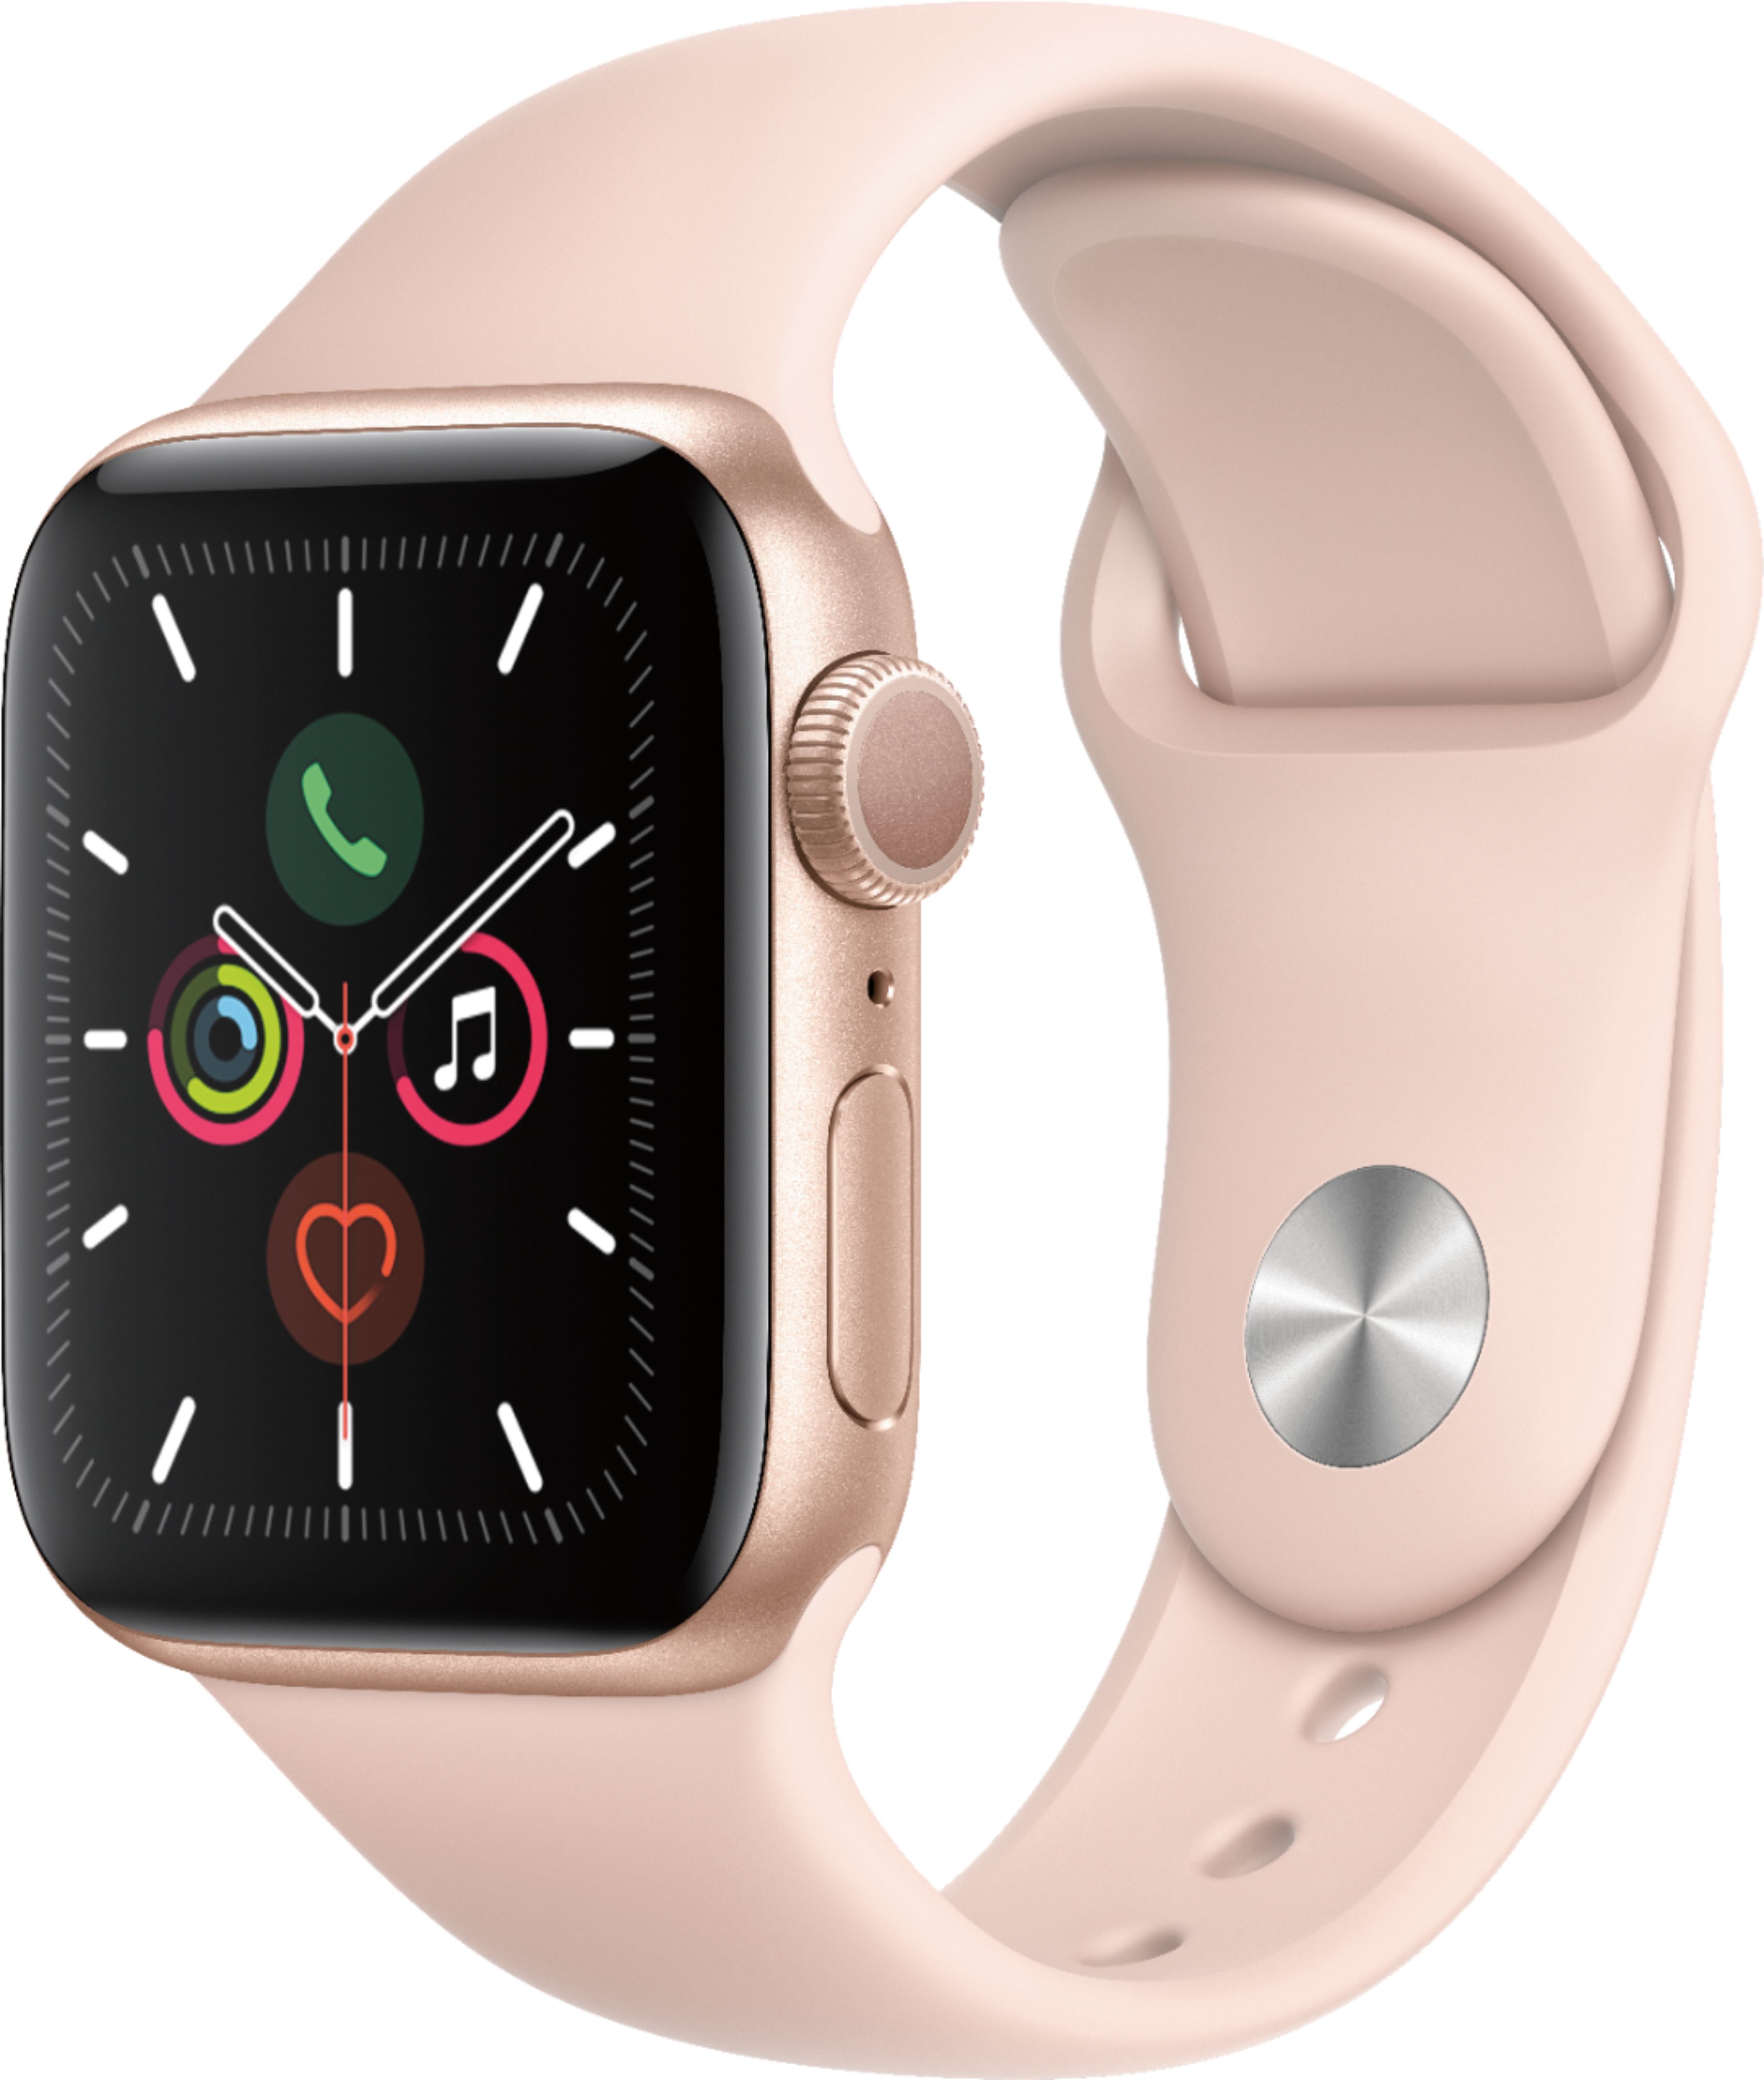 rose gold apple watch series 3 new